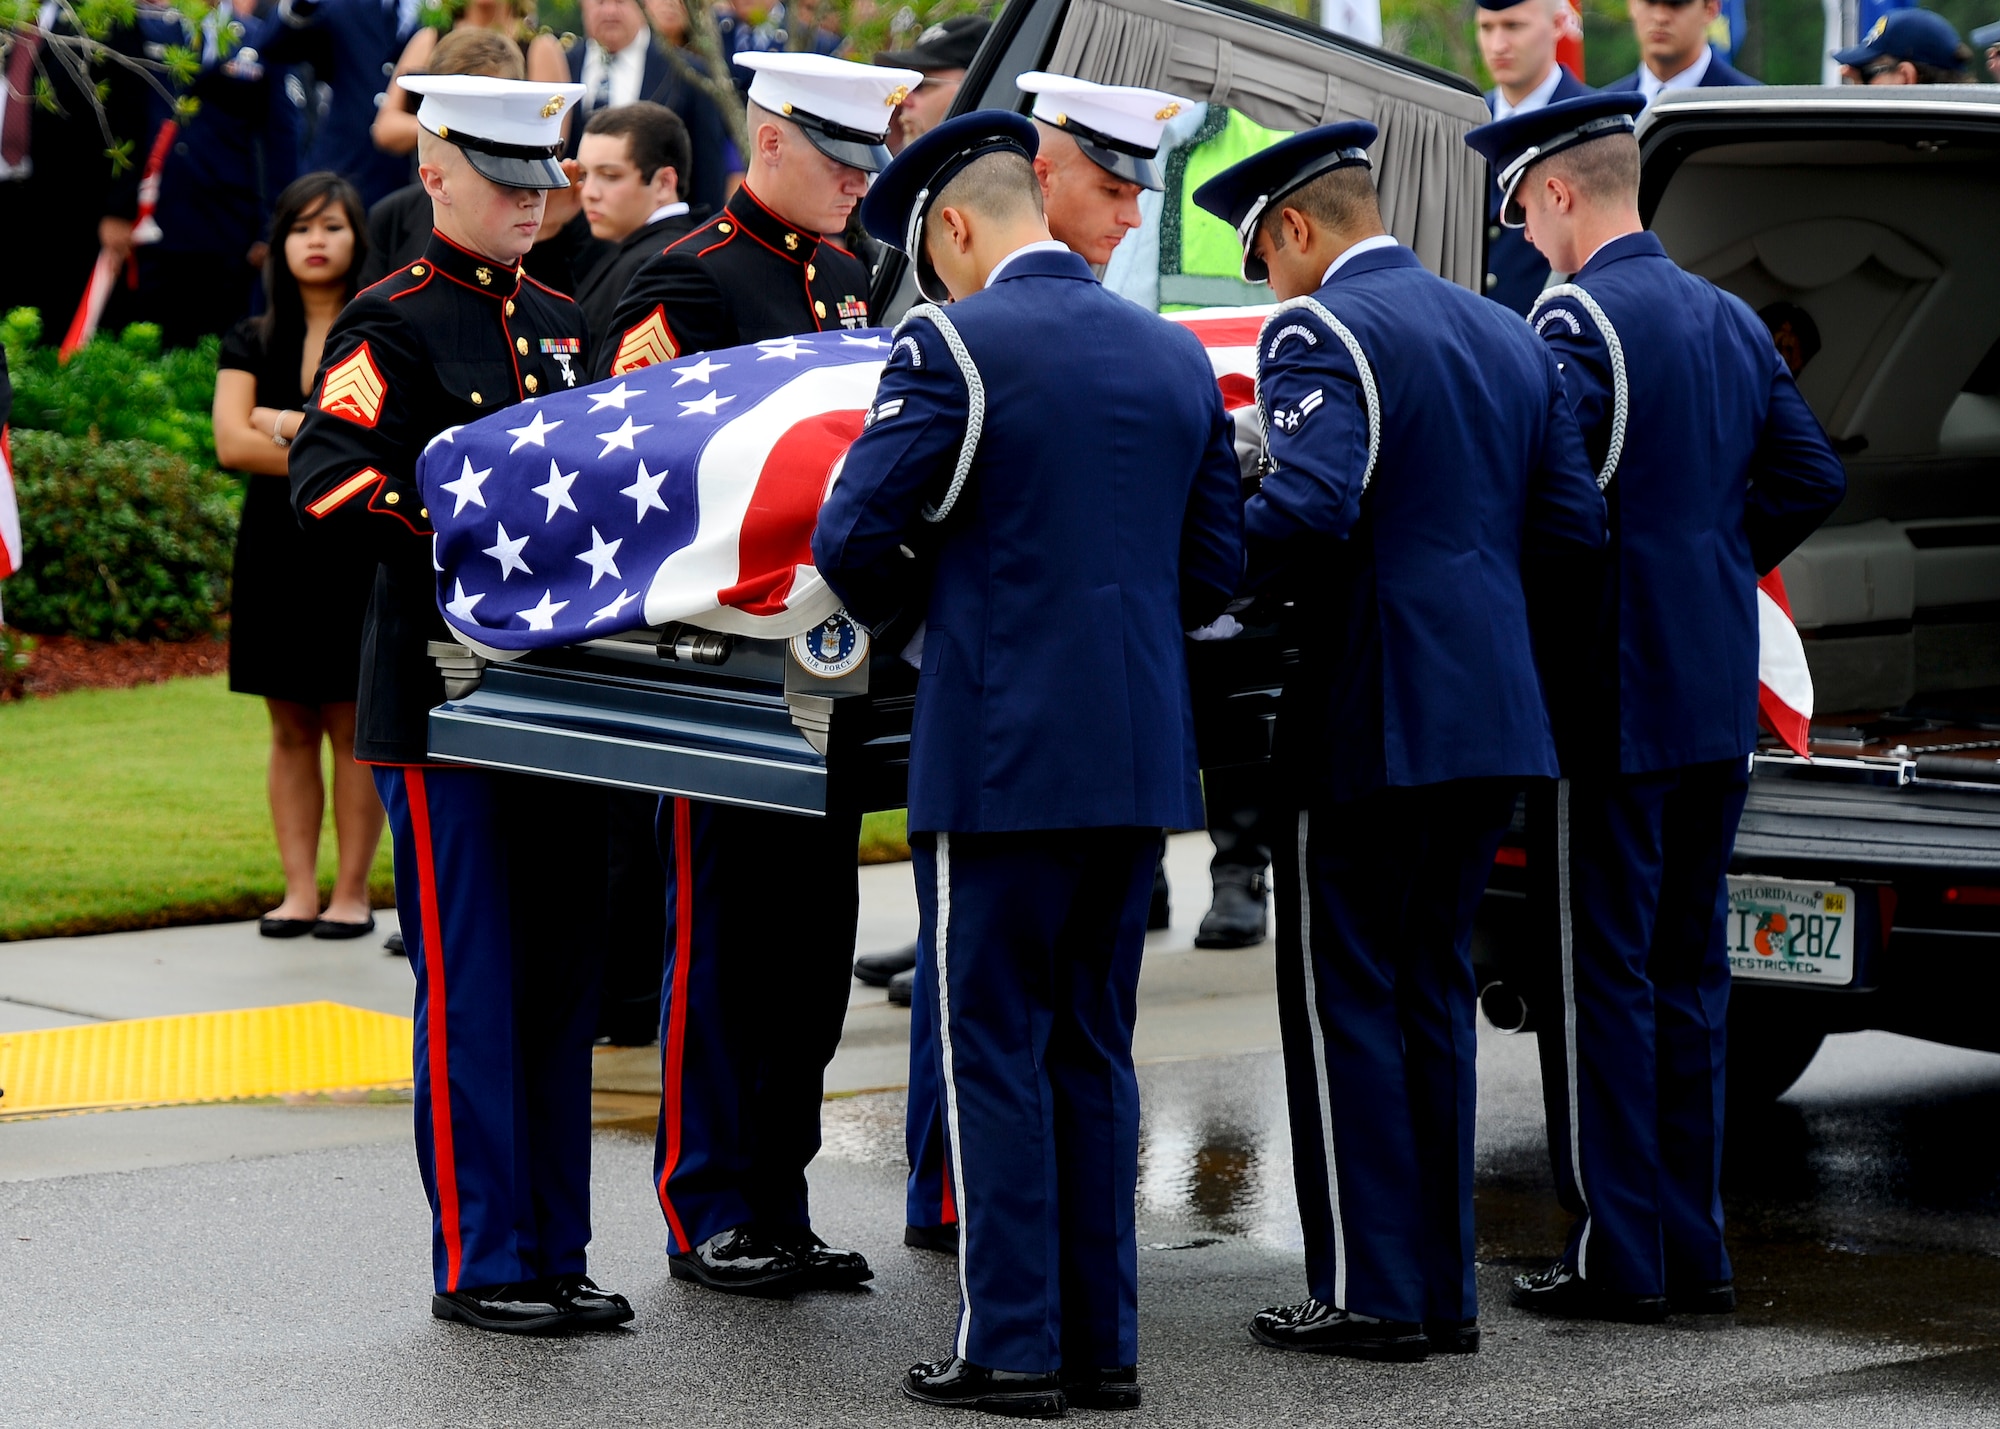 Pallbearers, made up of Airmen and Marines, lift the casket of retired U.S. Air Force Col. George “Bud” Day from his hearse during the funeral service at Barrancas National Cemetery on Naval Air Station Pensacola, Fla., Aug. 1, 2013. Day, a Medal of Honor recipient and combat pilot with service in World War II, Korea and Vietnam, passed away July 28 at the age of 88. (U.S. Air Force Photo/ Airman 1st Class Jeffrey Parkinson)